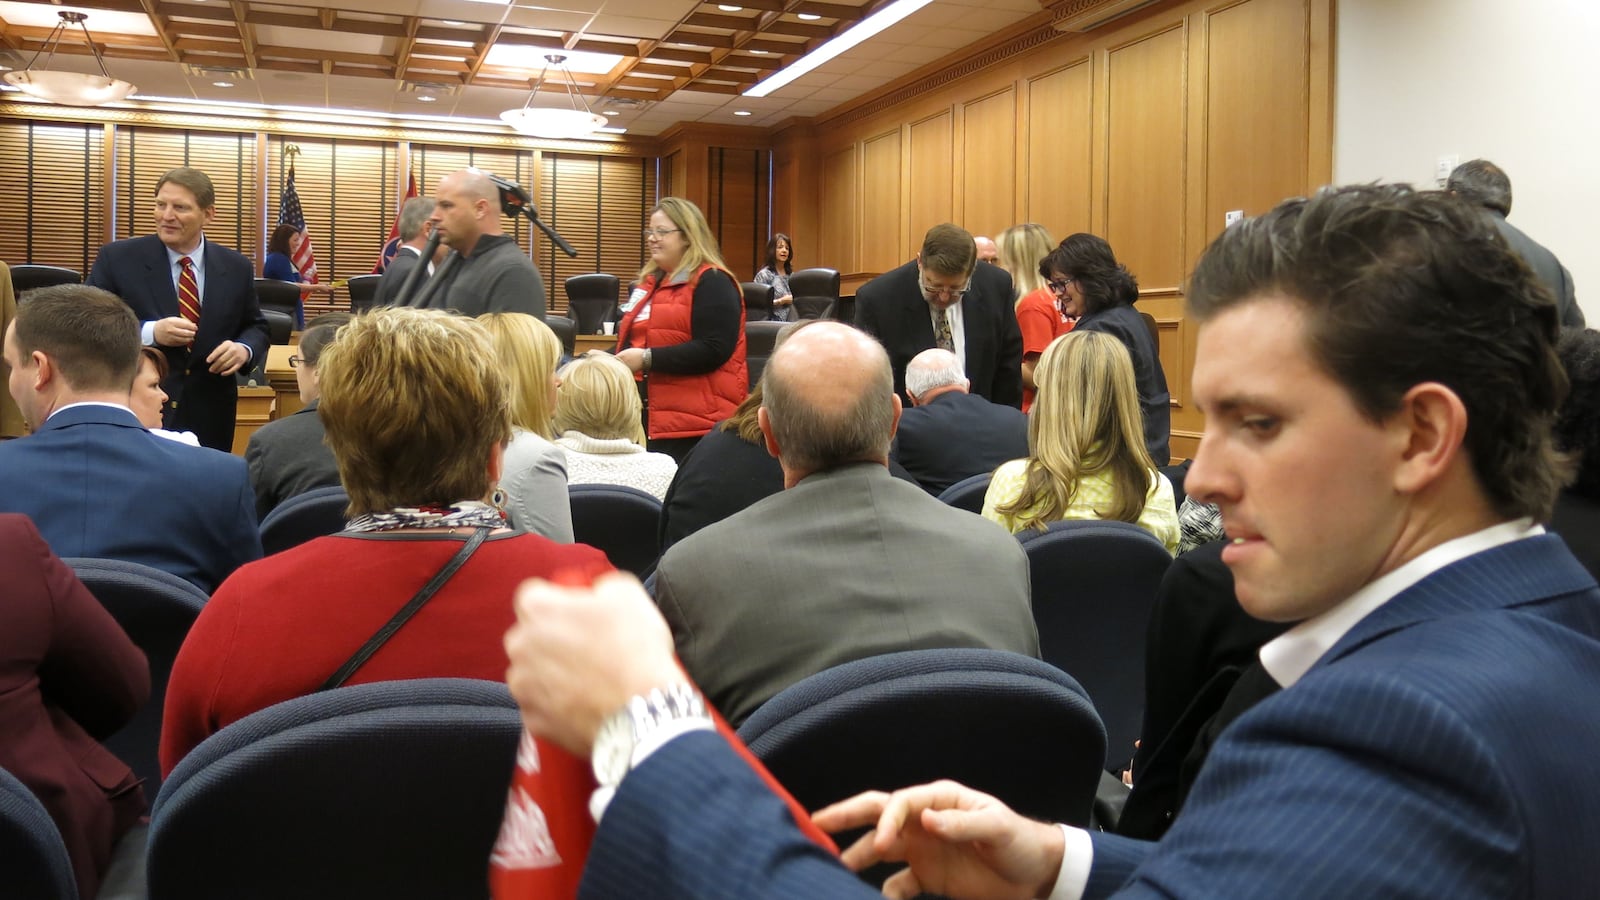 In February, the state House Education Instruction and Planning convened before a packed crowd interested in the fate of the Common Core State Standards. This week, the crowd was lighter, and the bill was scrapped.